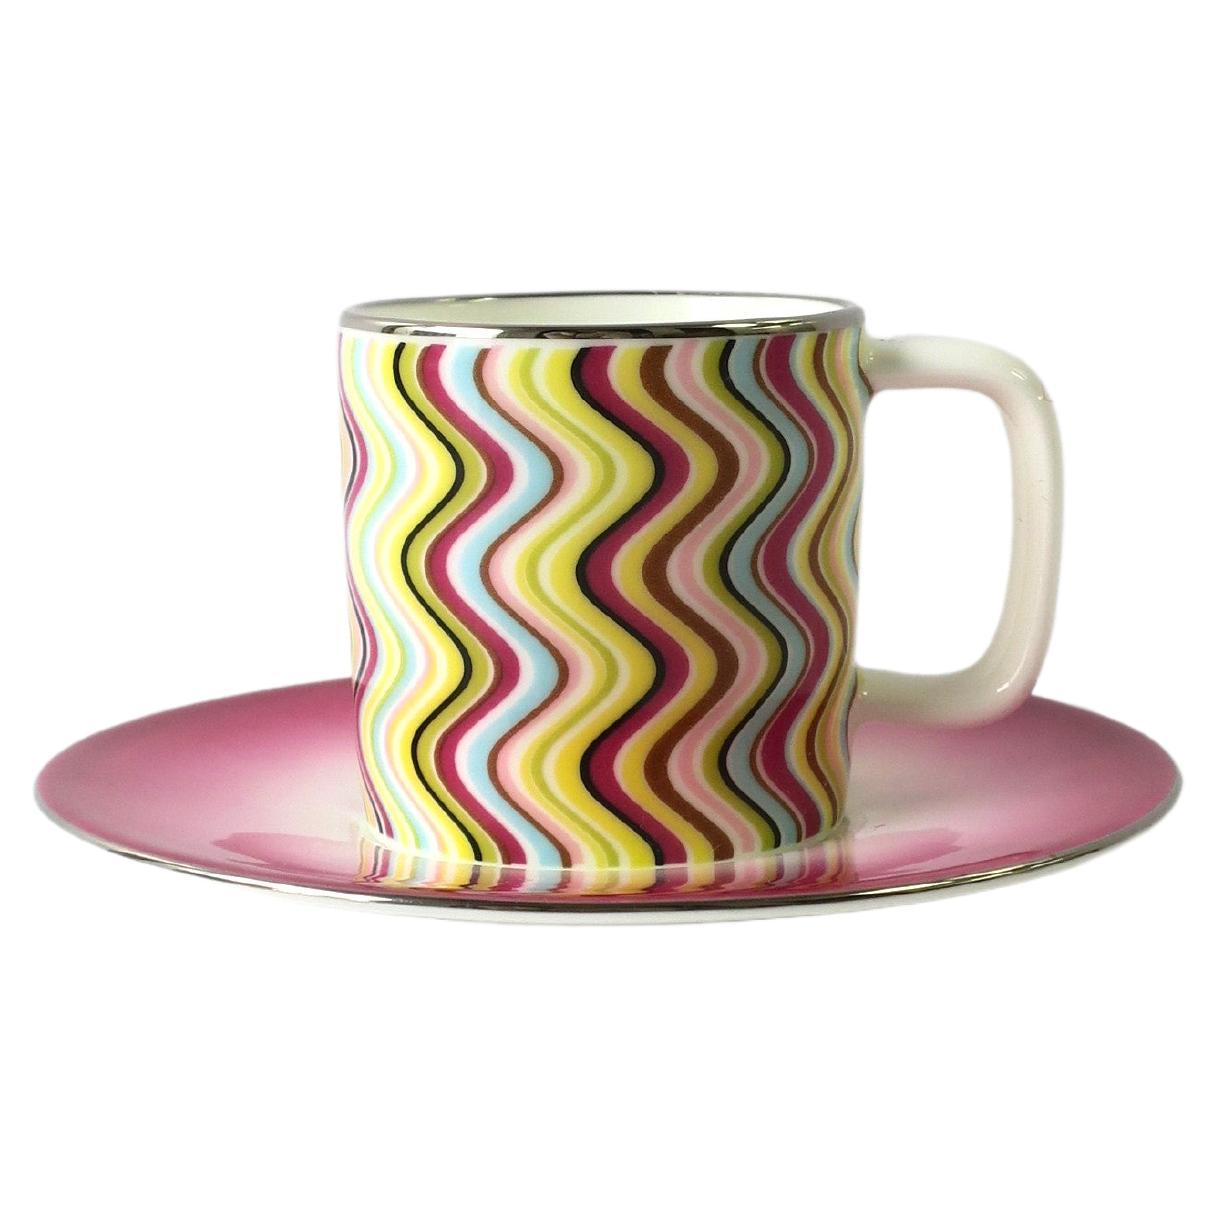 Missoni Italian Porcelain Coffee Espresso Cup and Saucer For Sale